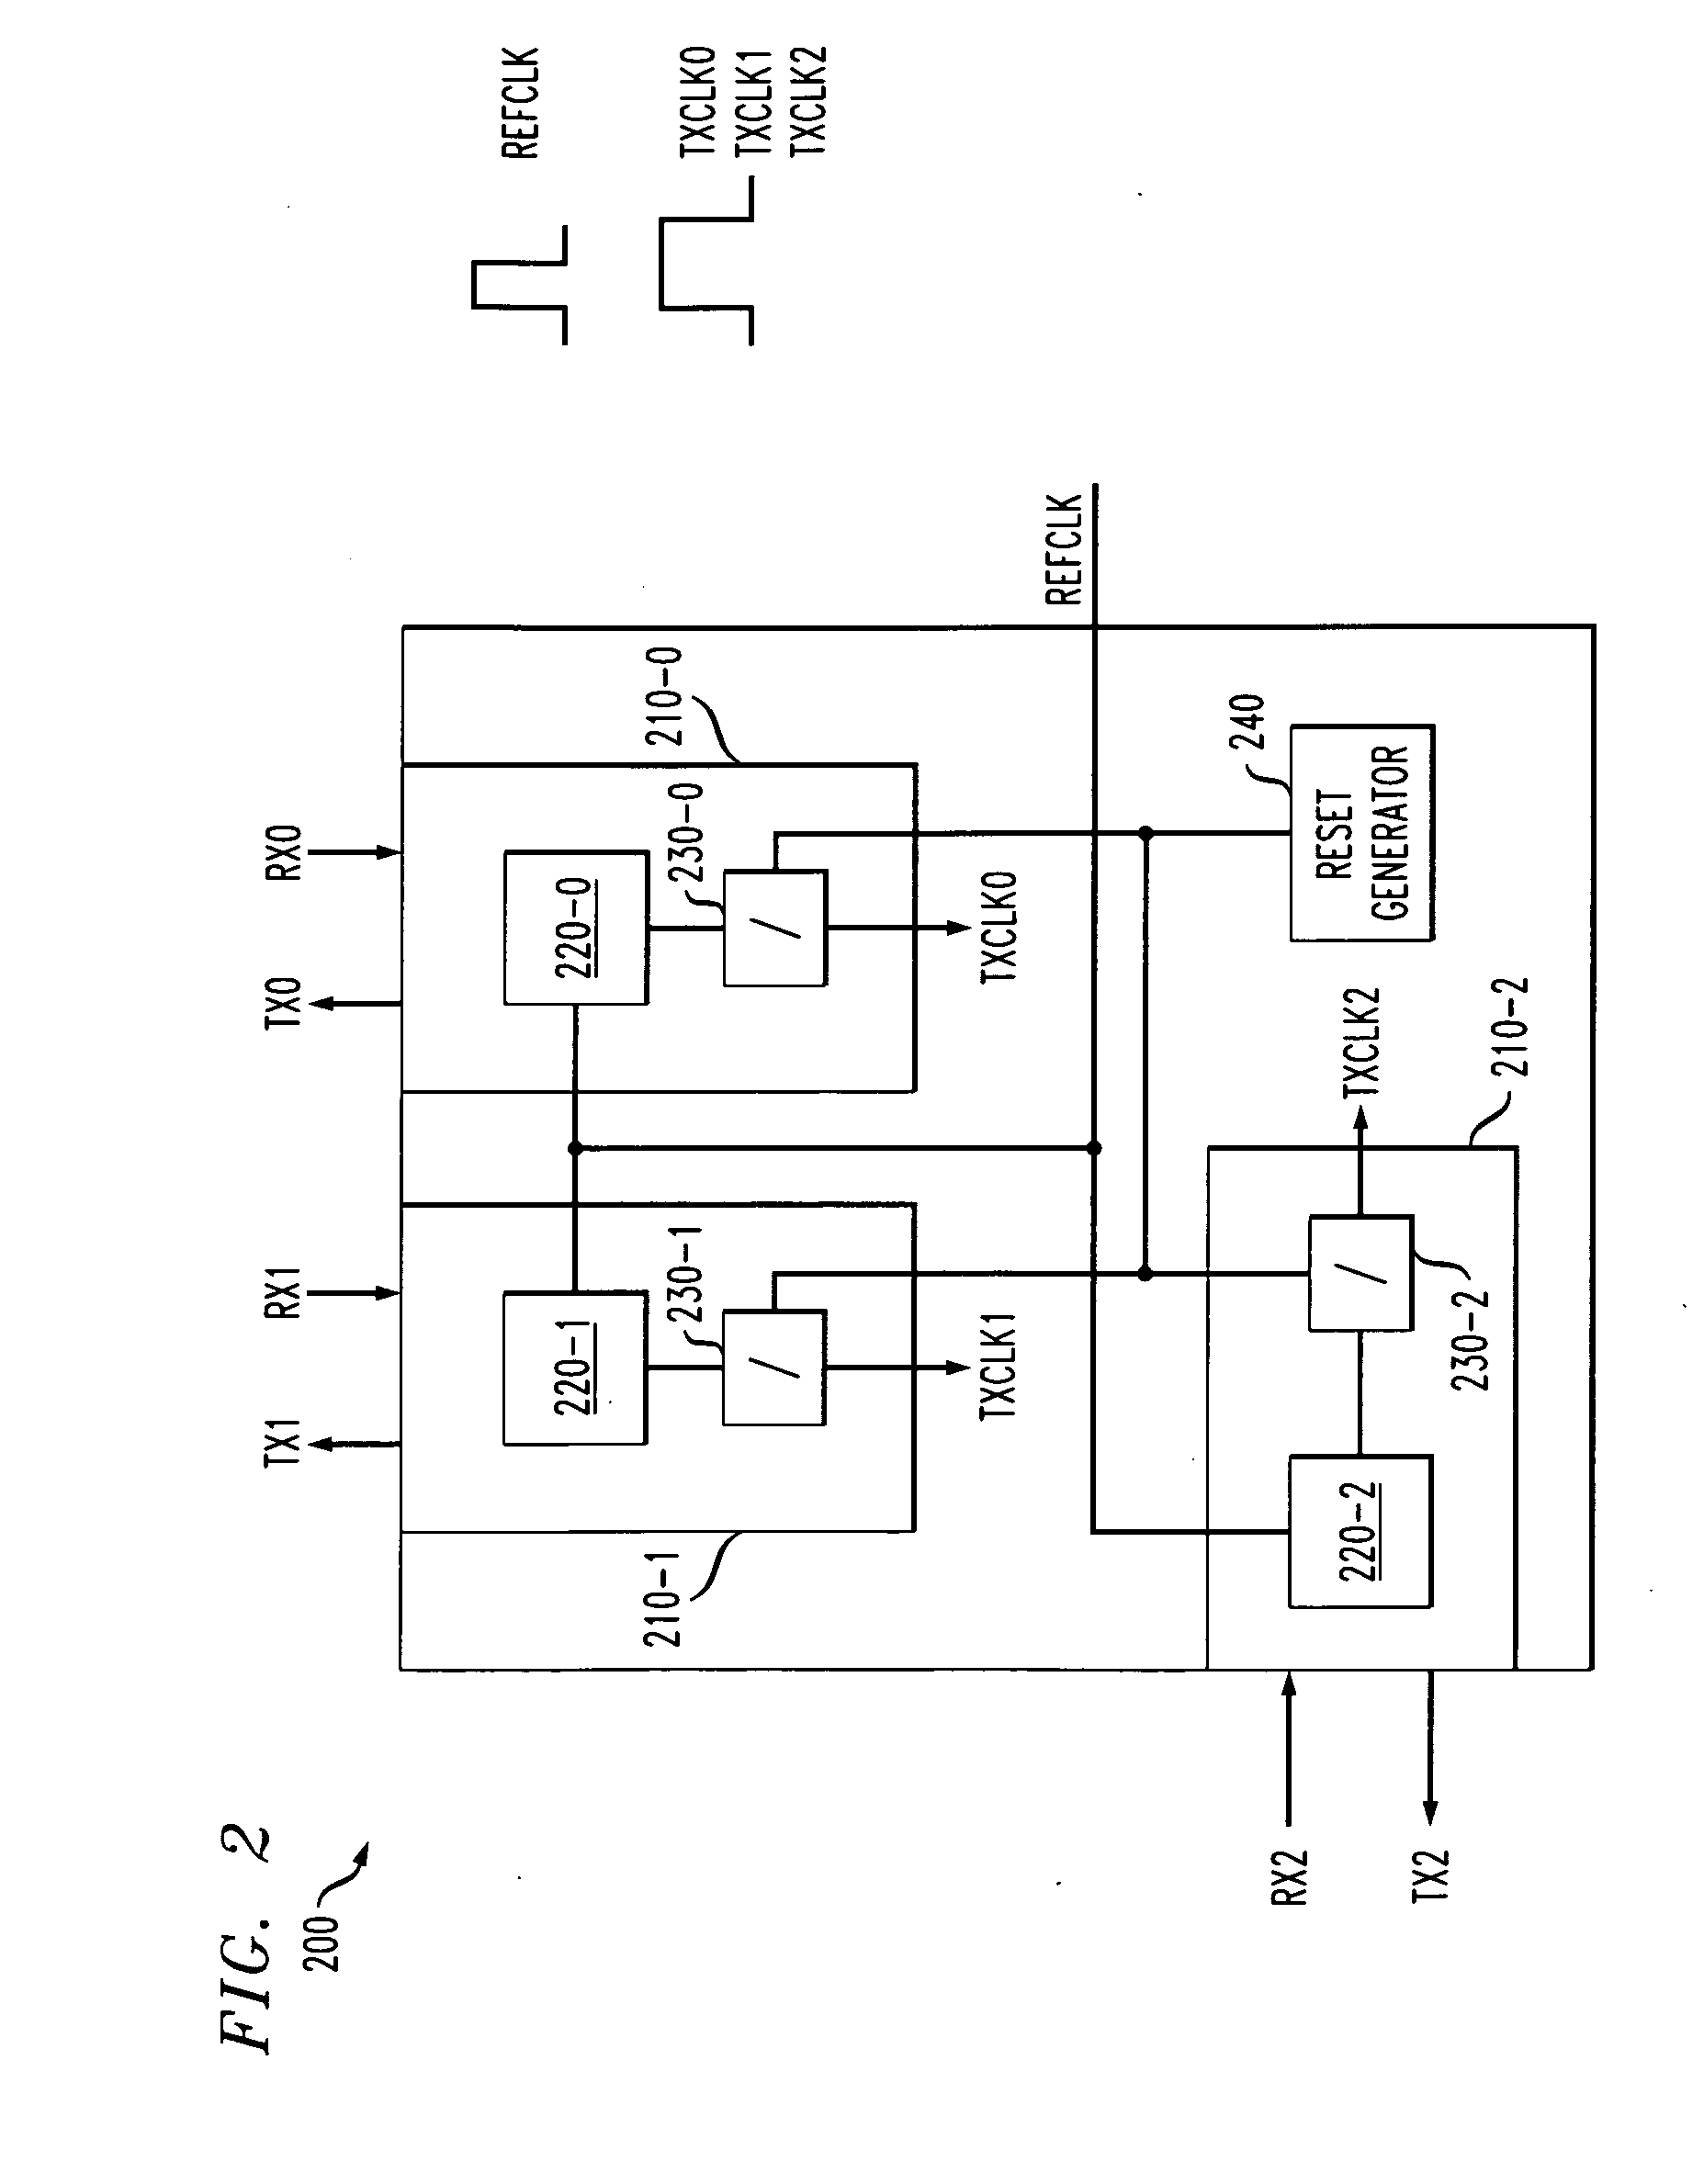 Method and apparatus for automatic rate identification and channel synchronization in a master-slave setting for high data throughput applications